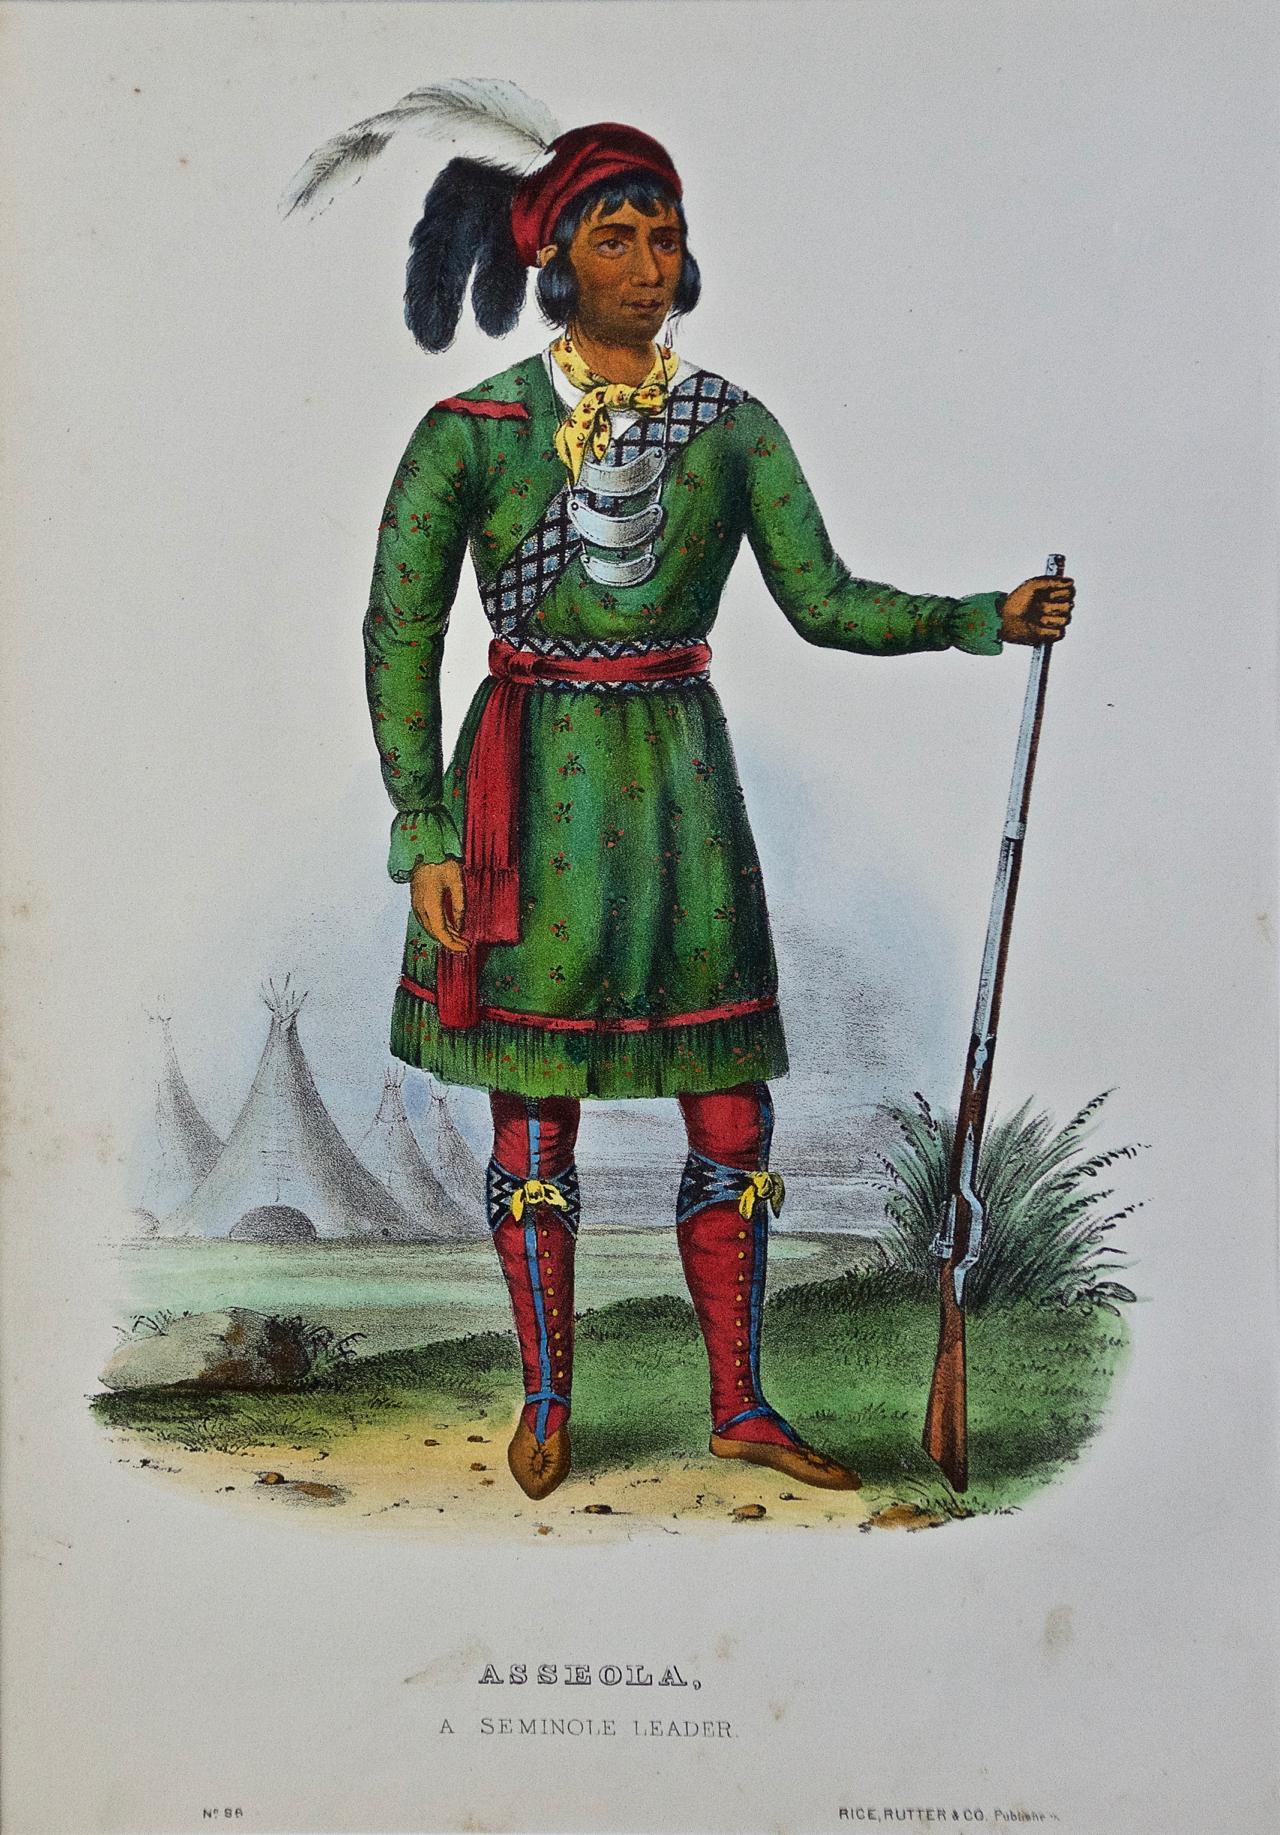 An original 19th century hand colored McKenney and Hall engraving of a Native American entitled "Asseola, A Seminole Leader, No. 56", published by Rice, Rutter & Co. in 1865.

This original McKenney and Hall engraving is presented in a cream colored